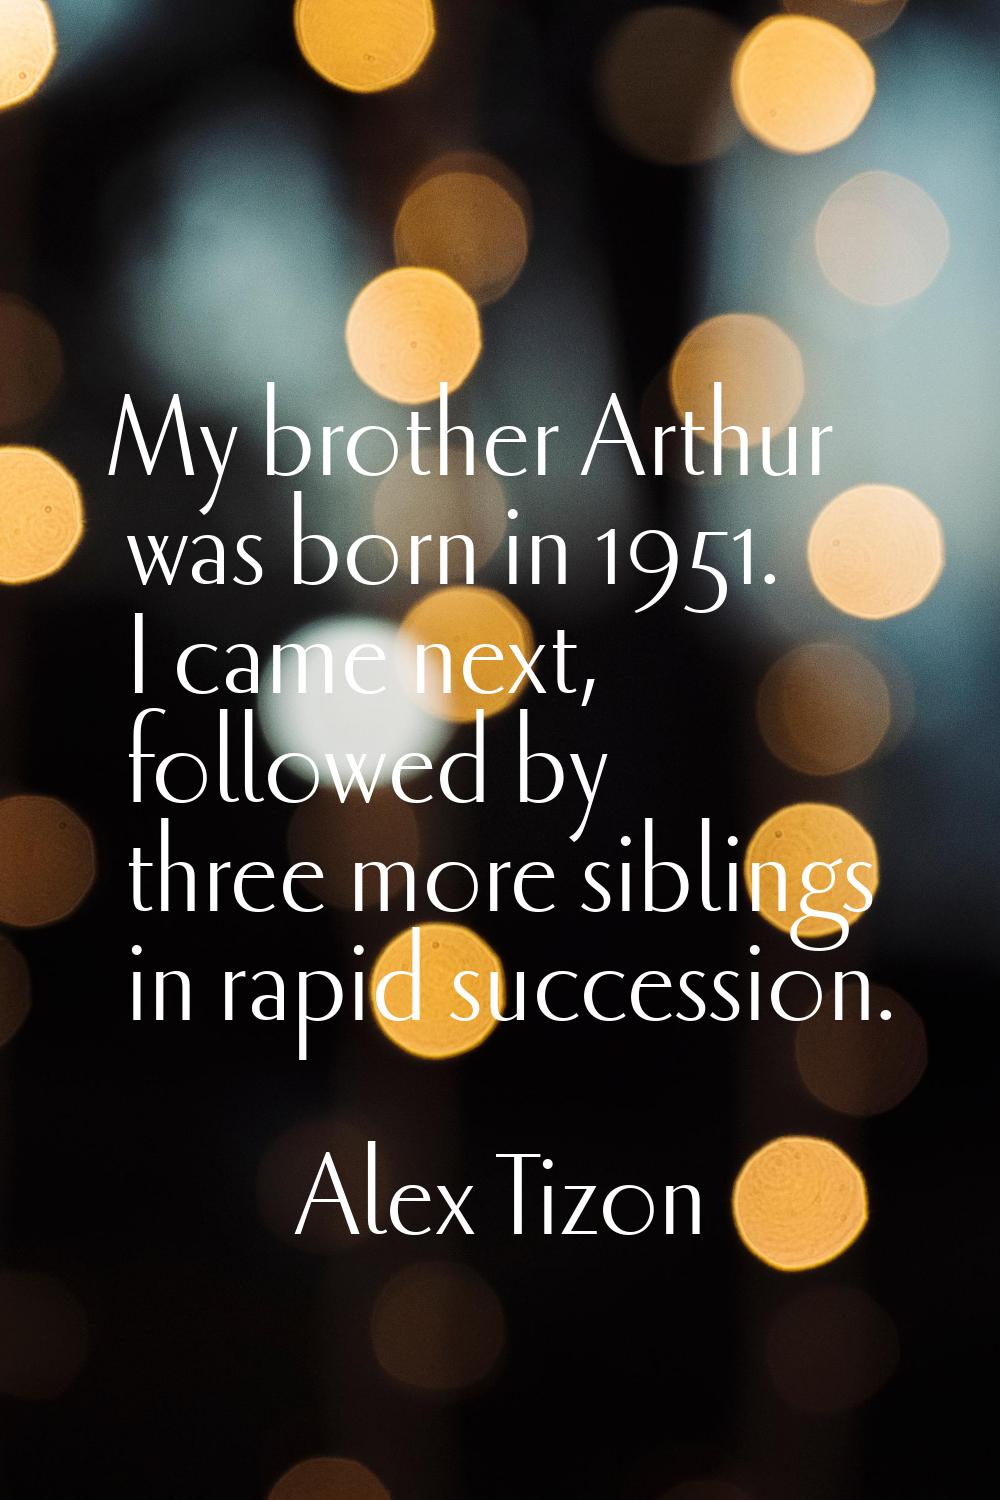 My brother Arthur was born in 1951. I came next, followed by three more siblings in rapid successio